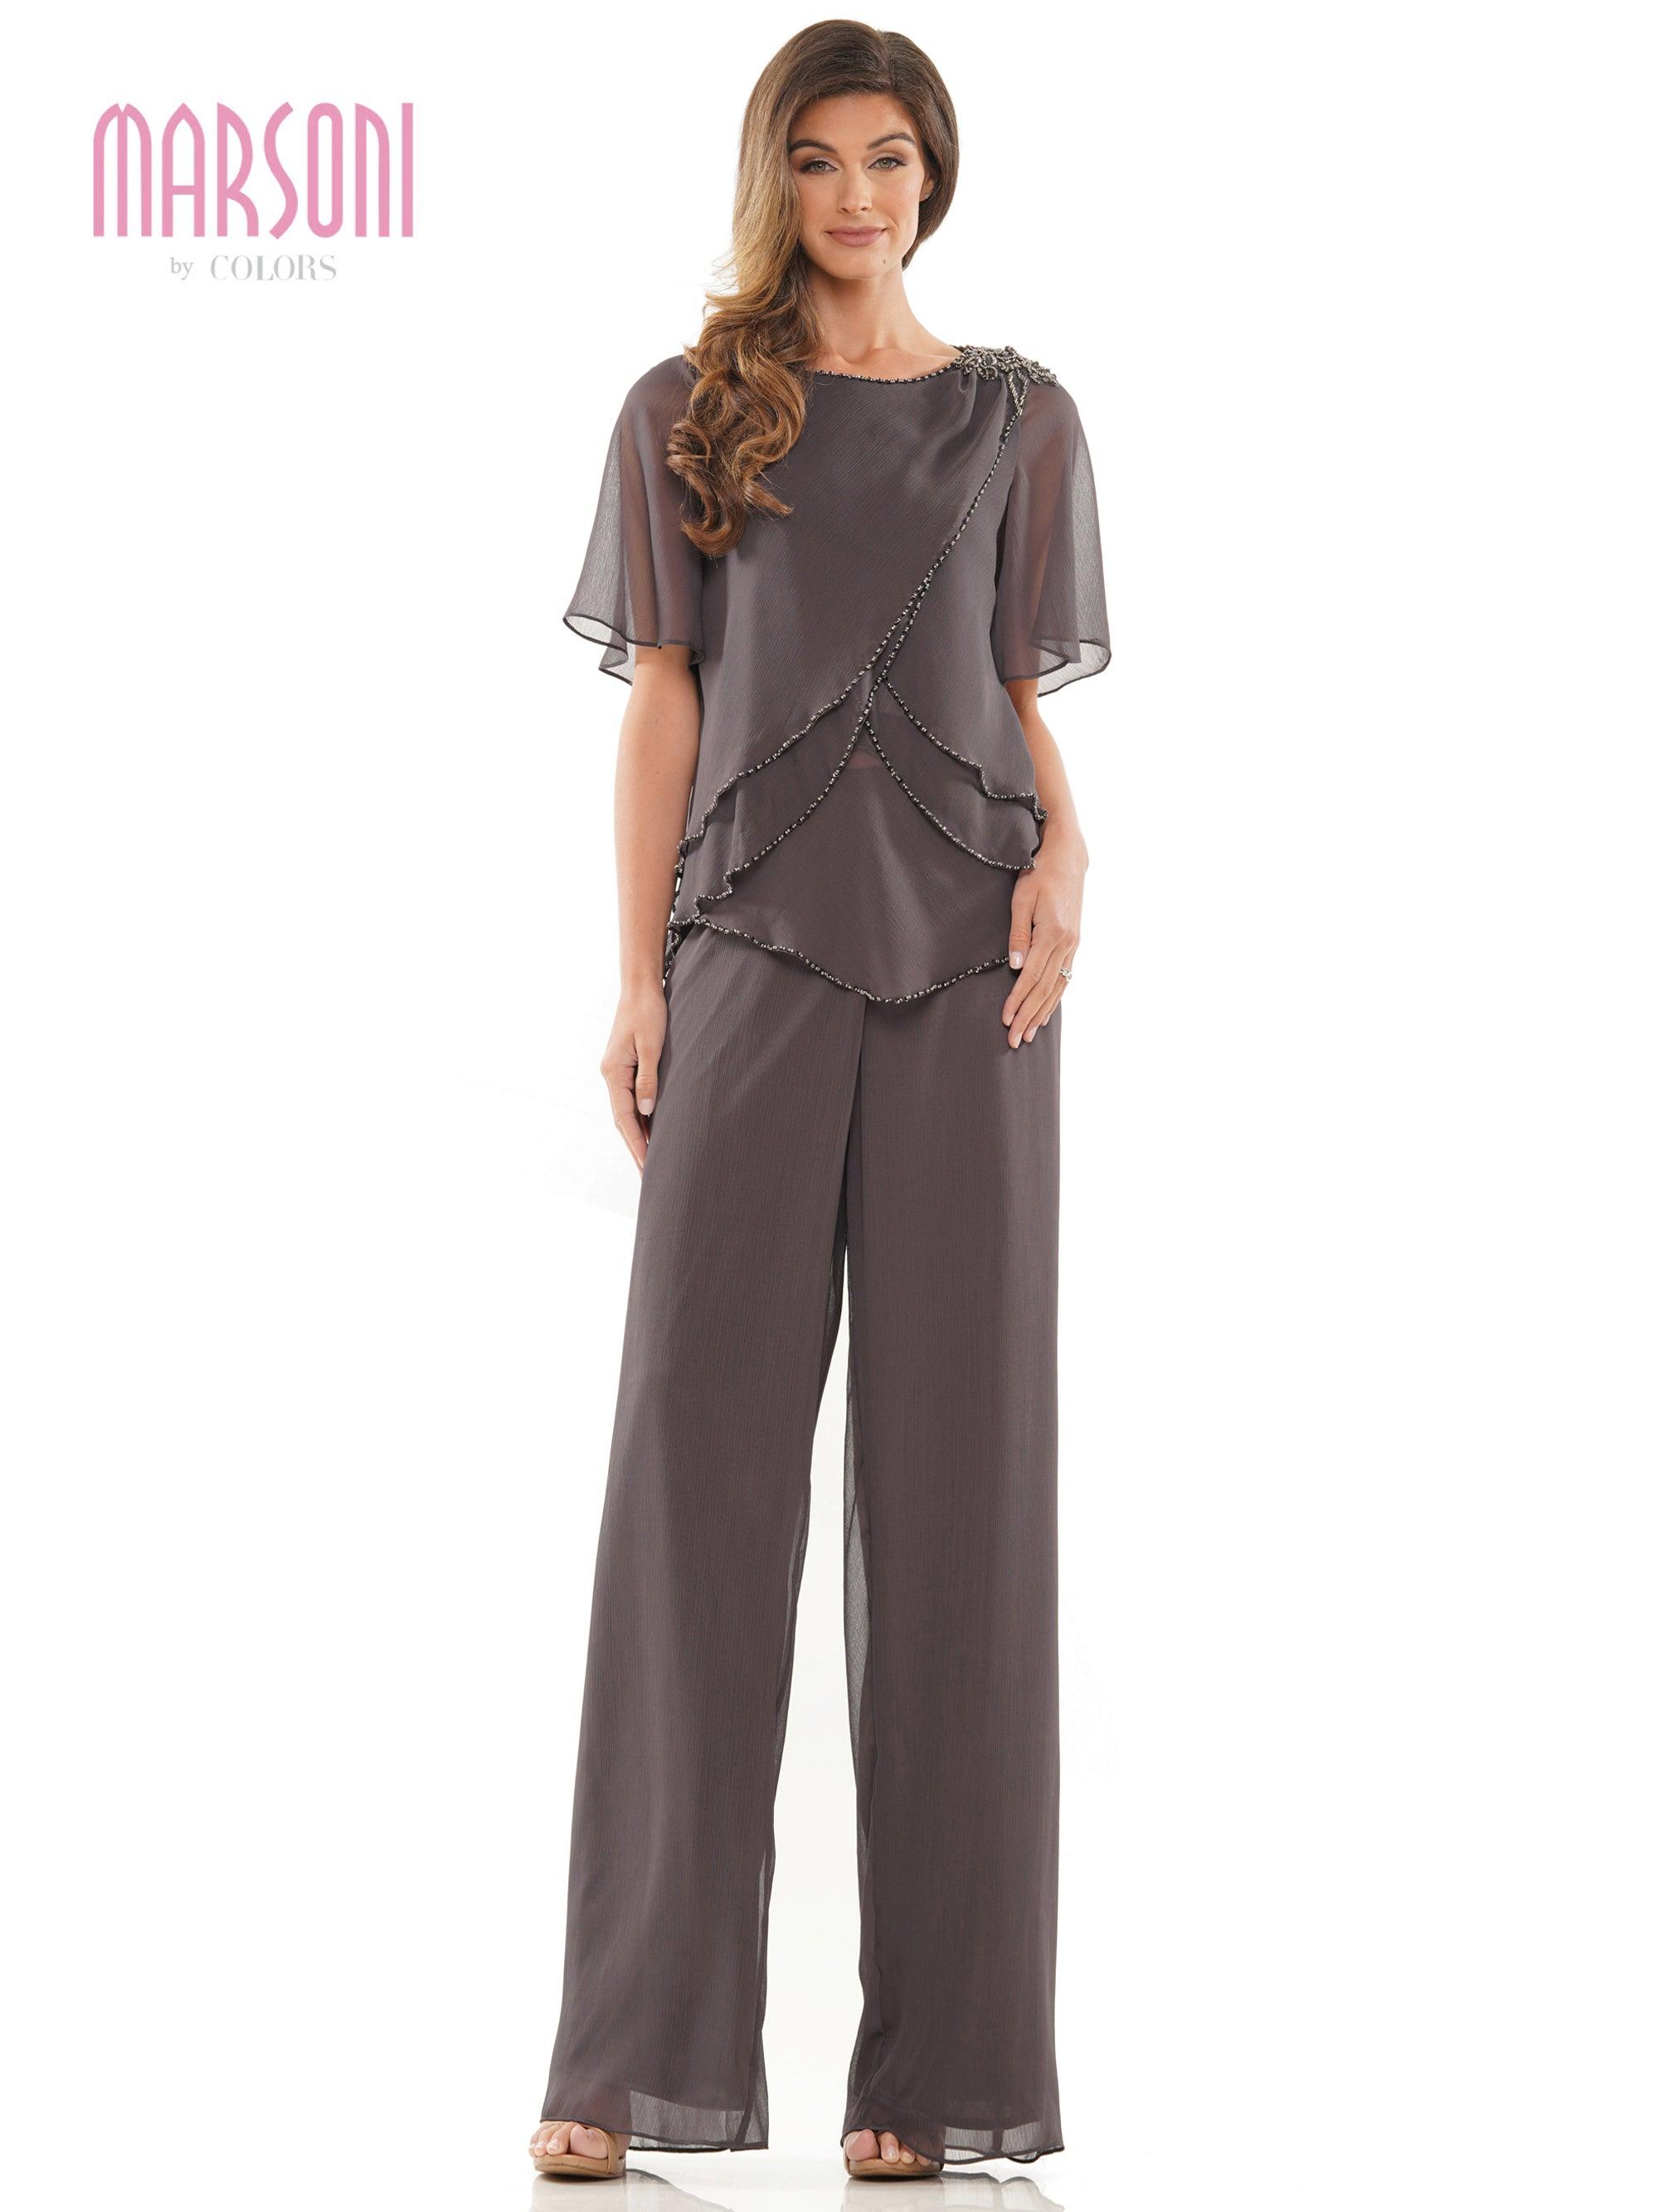 http://www.thedressoutlet.com/cdn/shop/products/marsoni-formal-mother-of-the-bride-pant-suit-m321-the-dress-outlet-1.jpg?v=1665821085